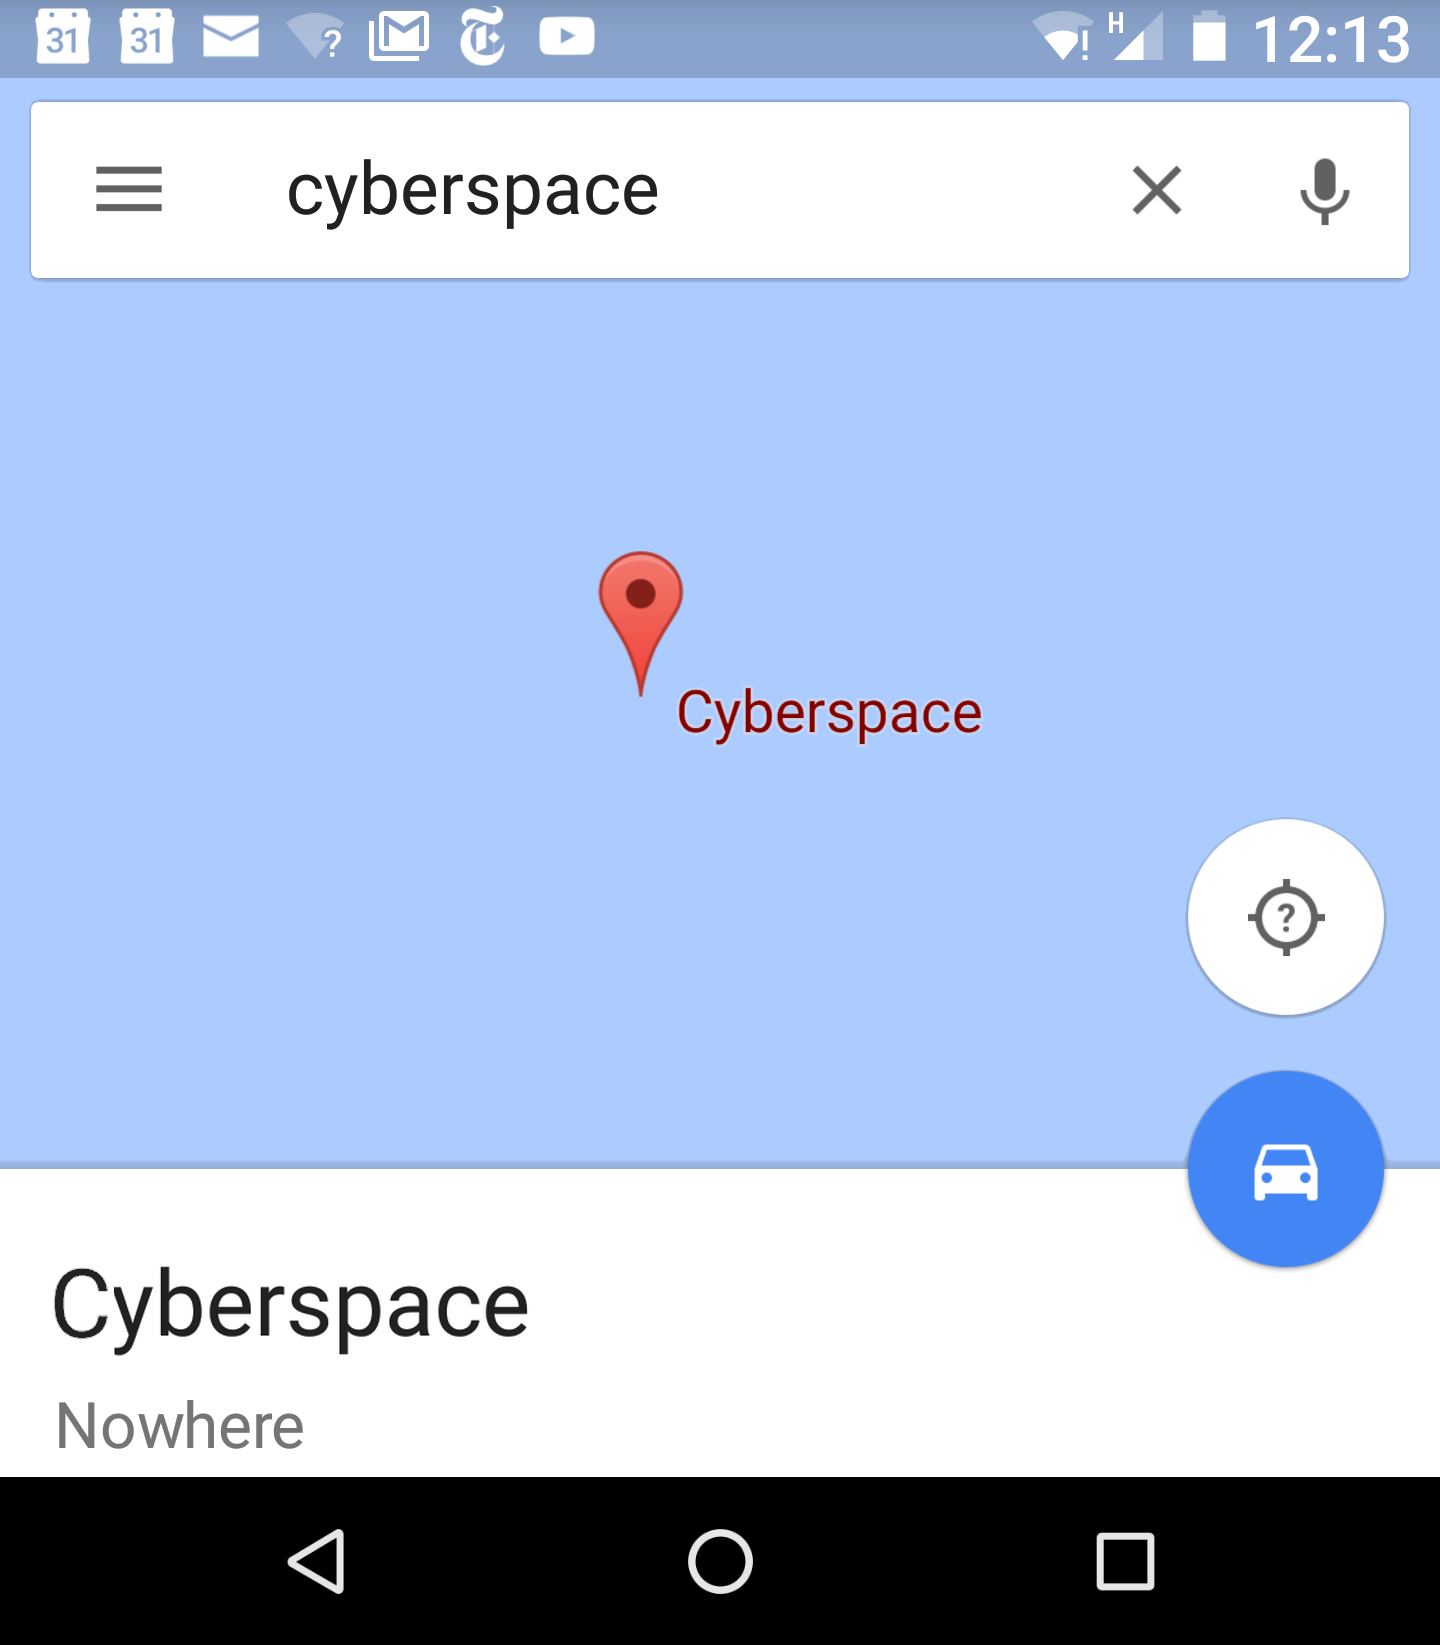 Image of Cyberspace as being nowhere in a blank map